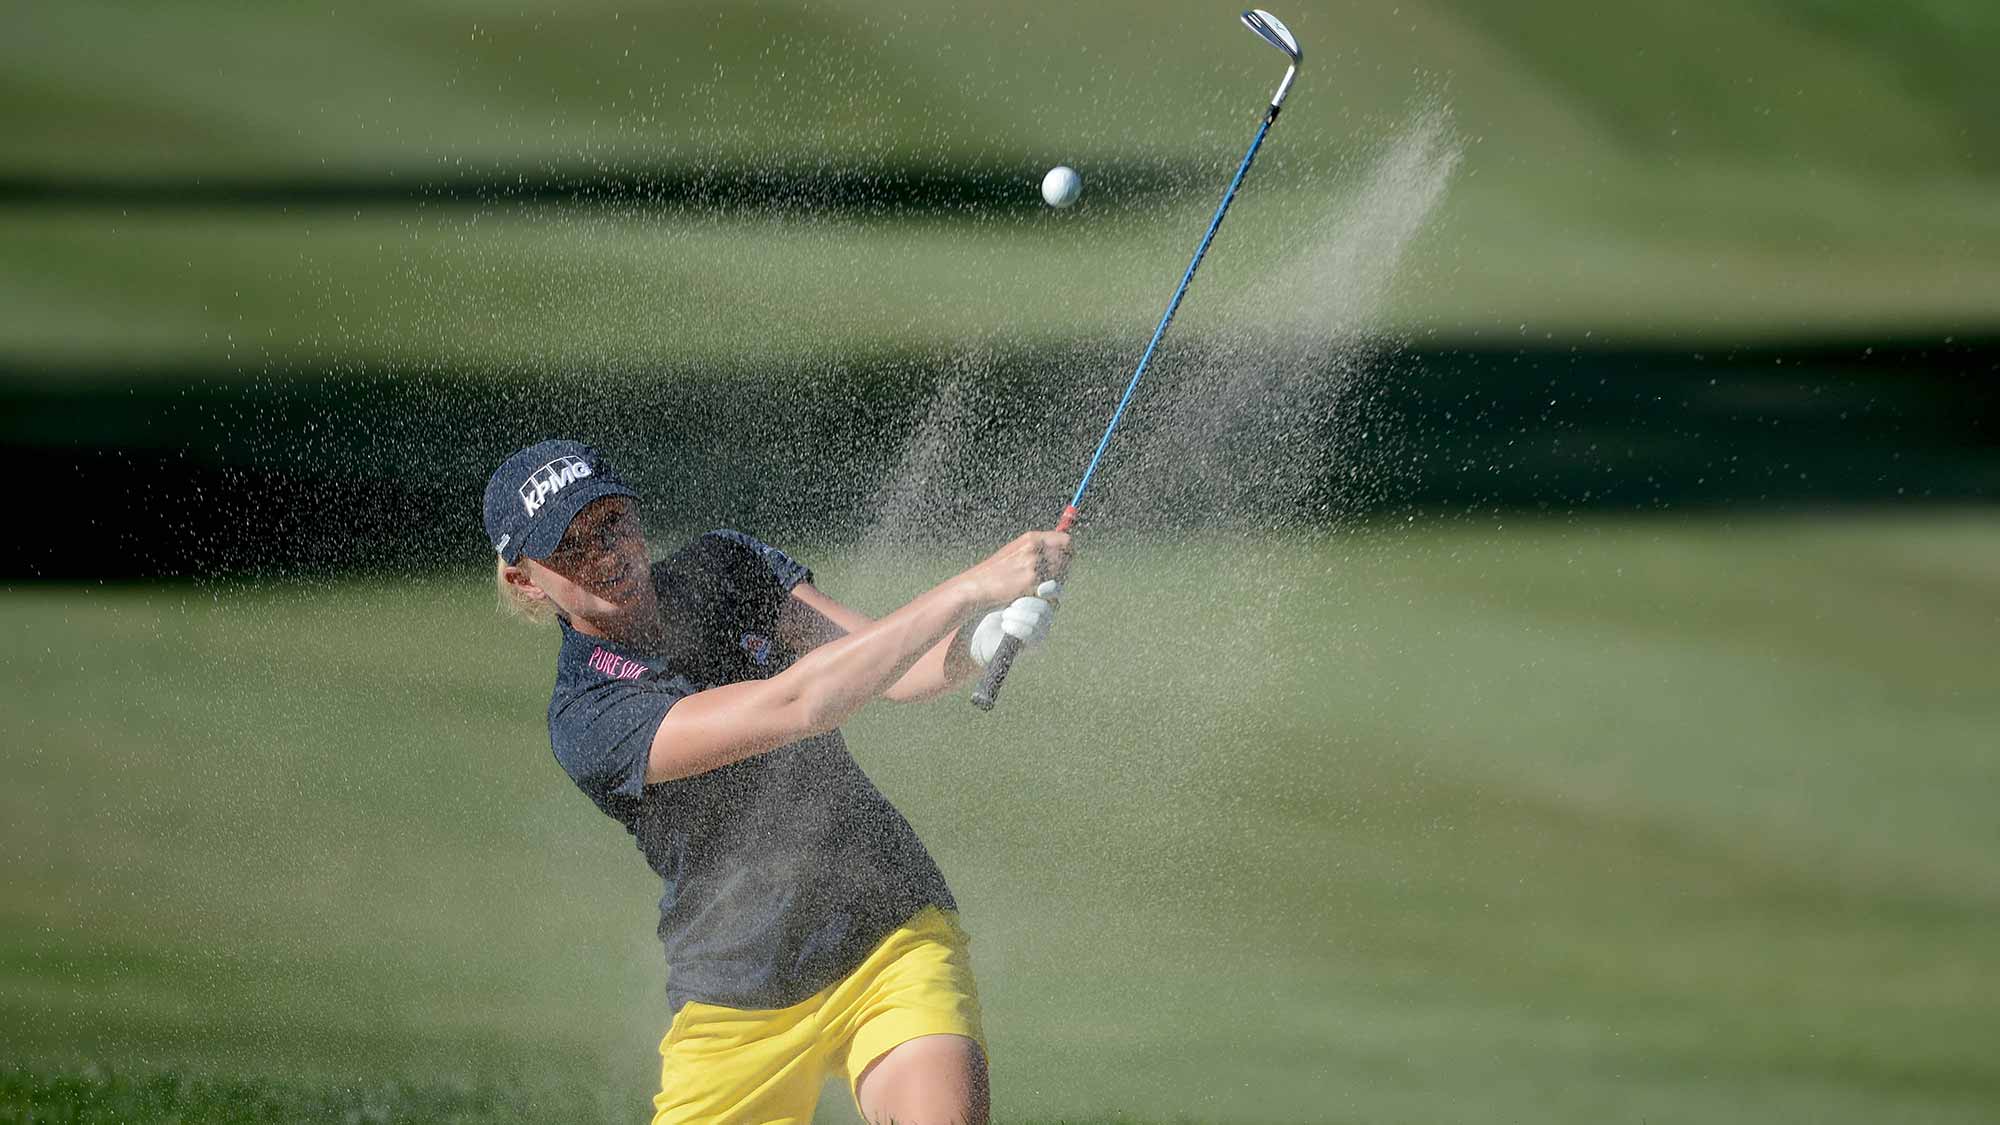 Stacy Lewis hits out of the bunker on the 15th hole during Round One of the LPGA KIA Classic at the Aviara Golf Club on March 26, 2015 in Carlsbad, California